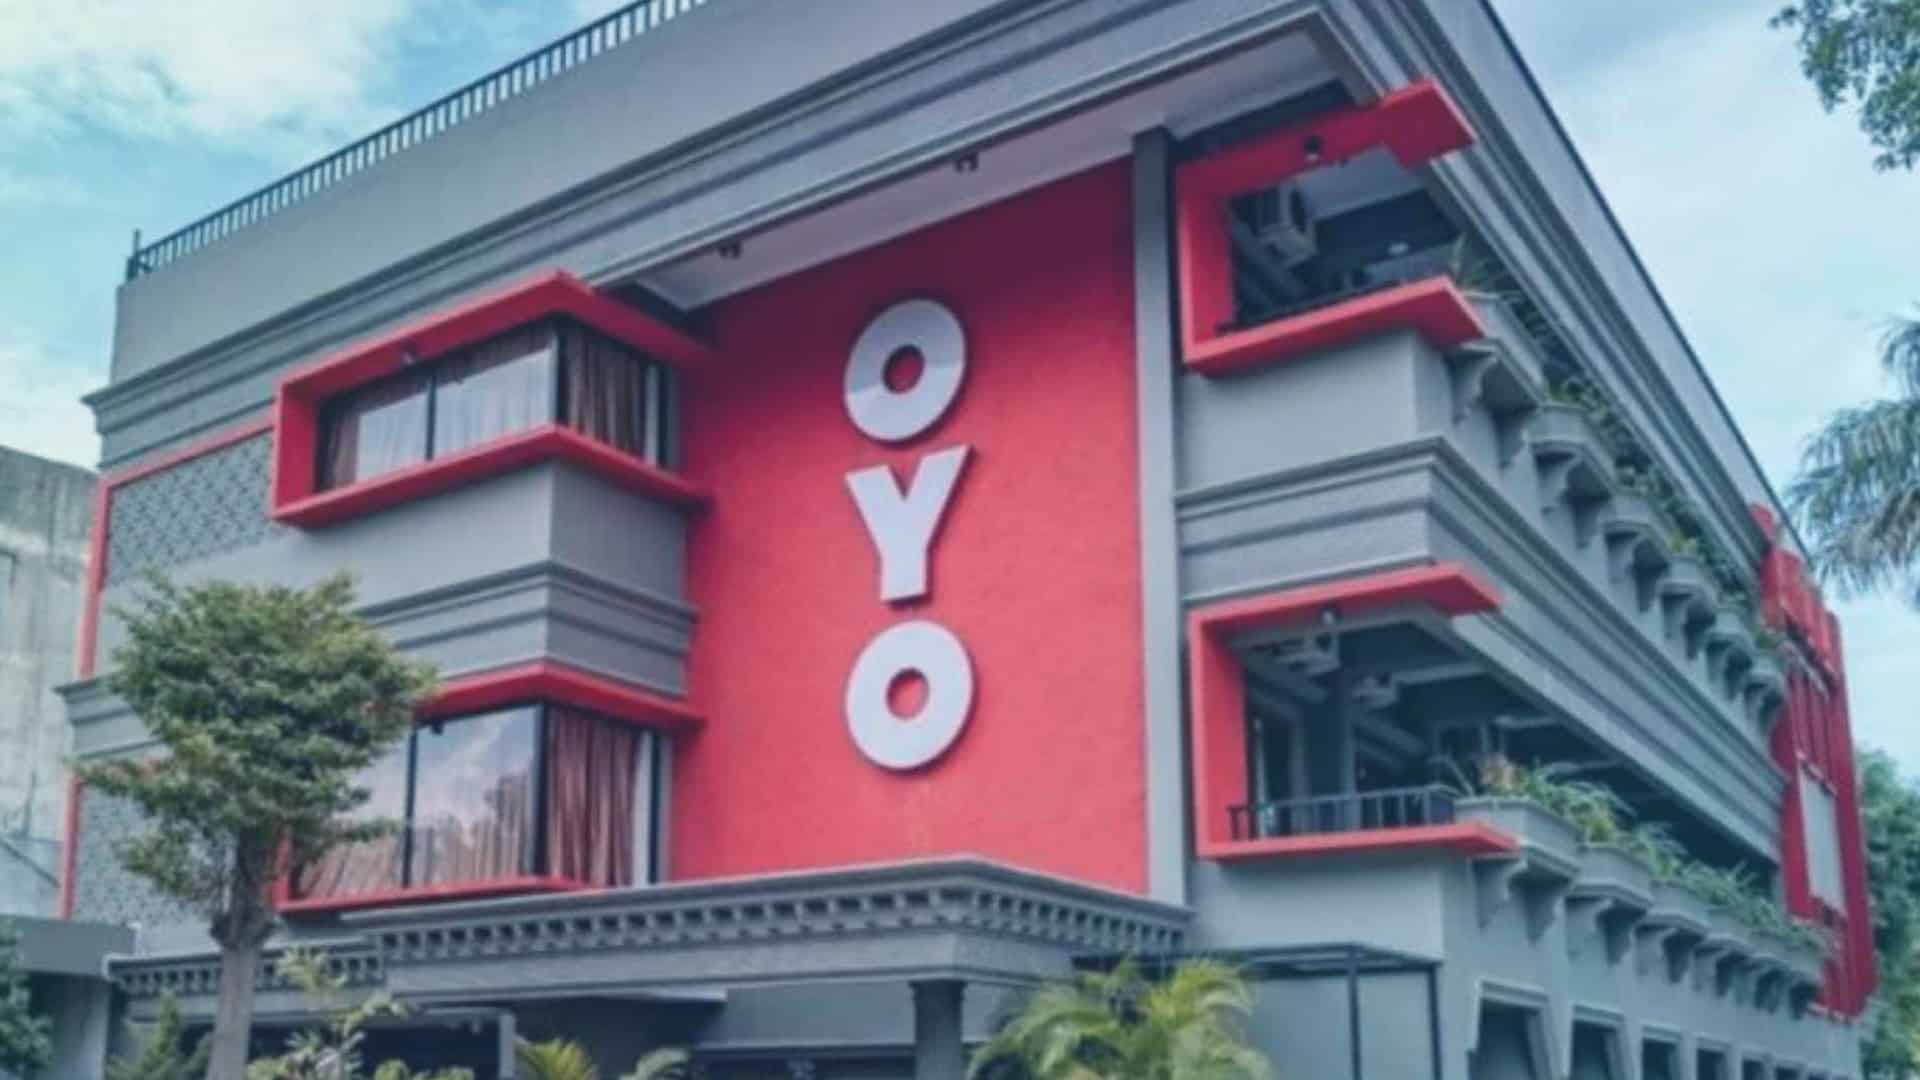 OYO completes acquisition of European firm Direct Booker